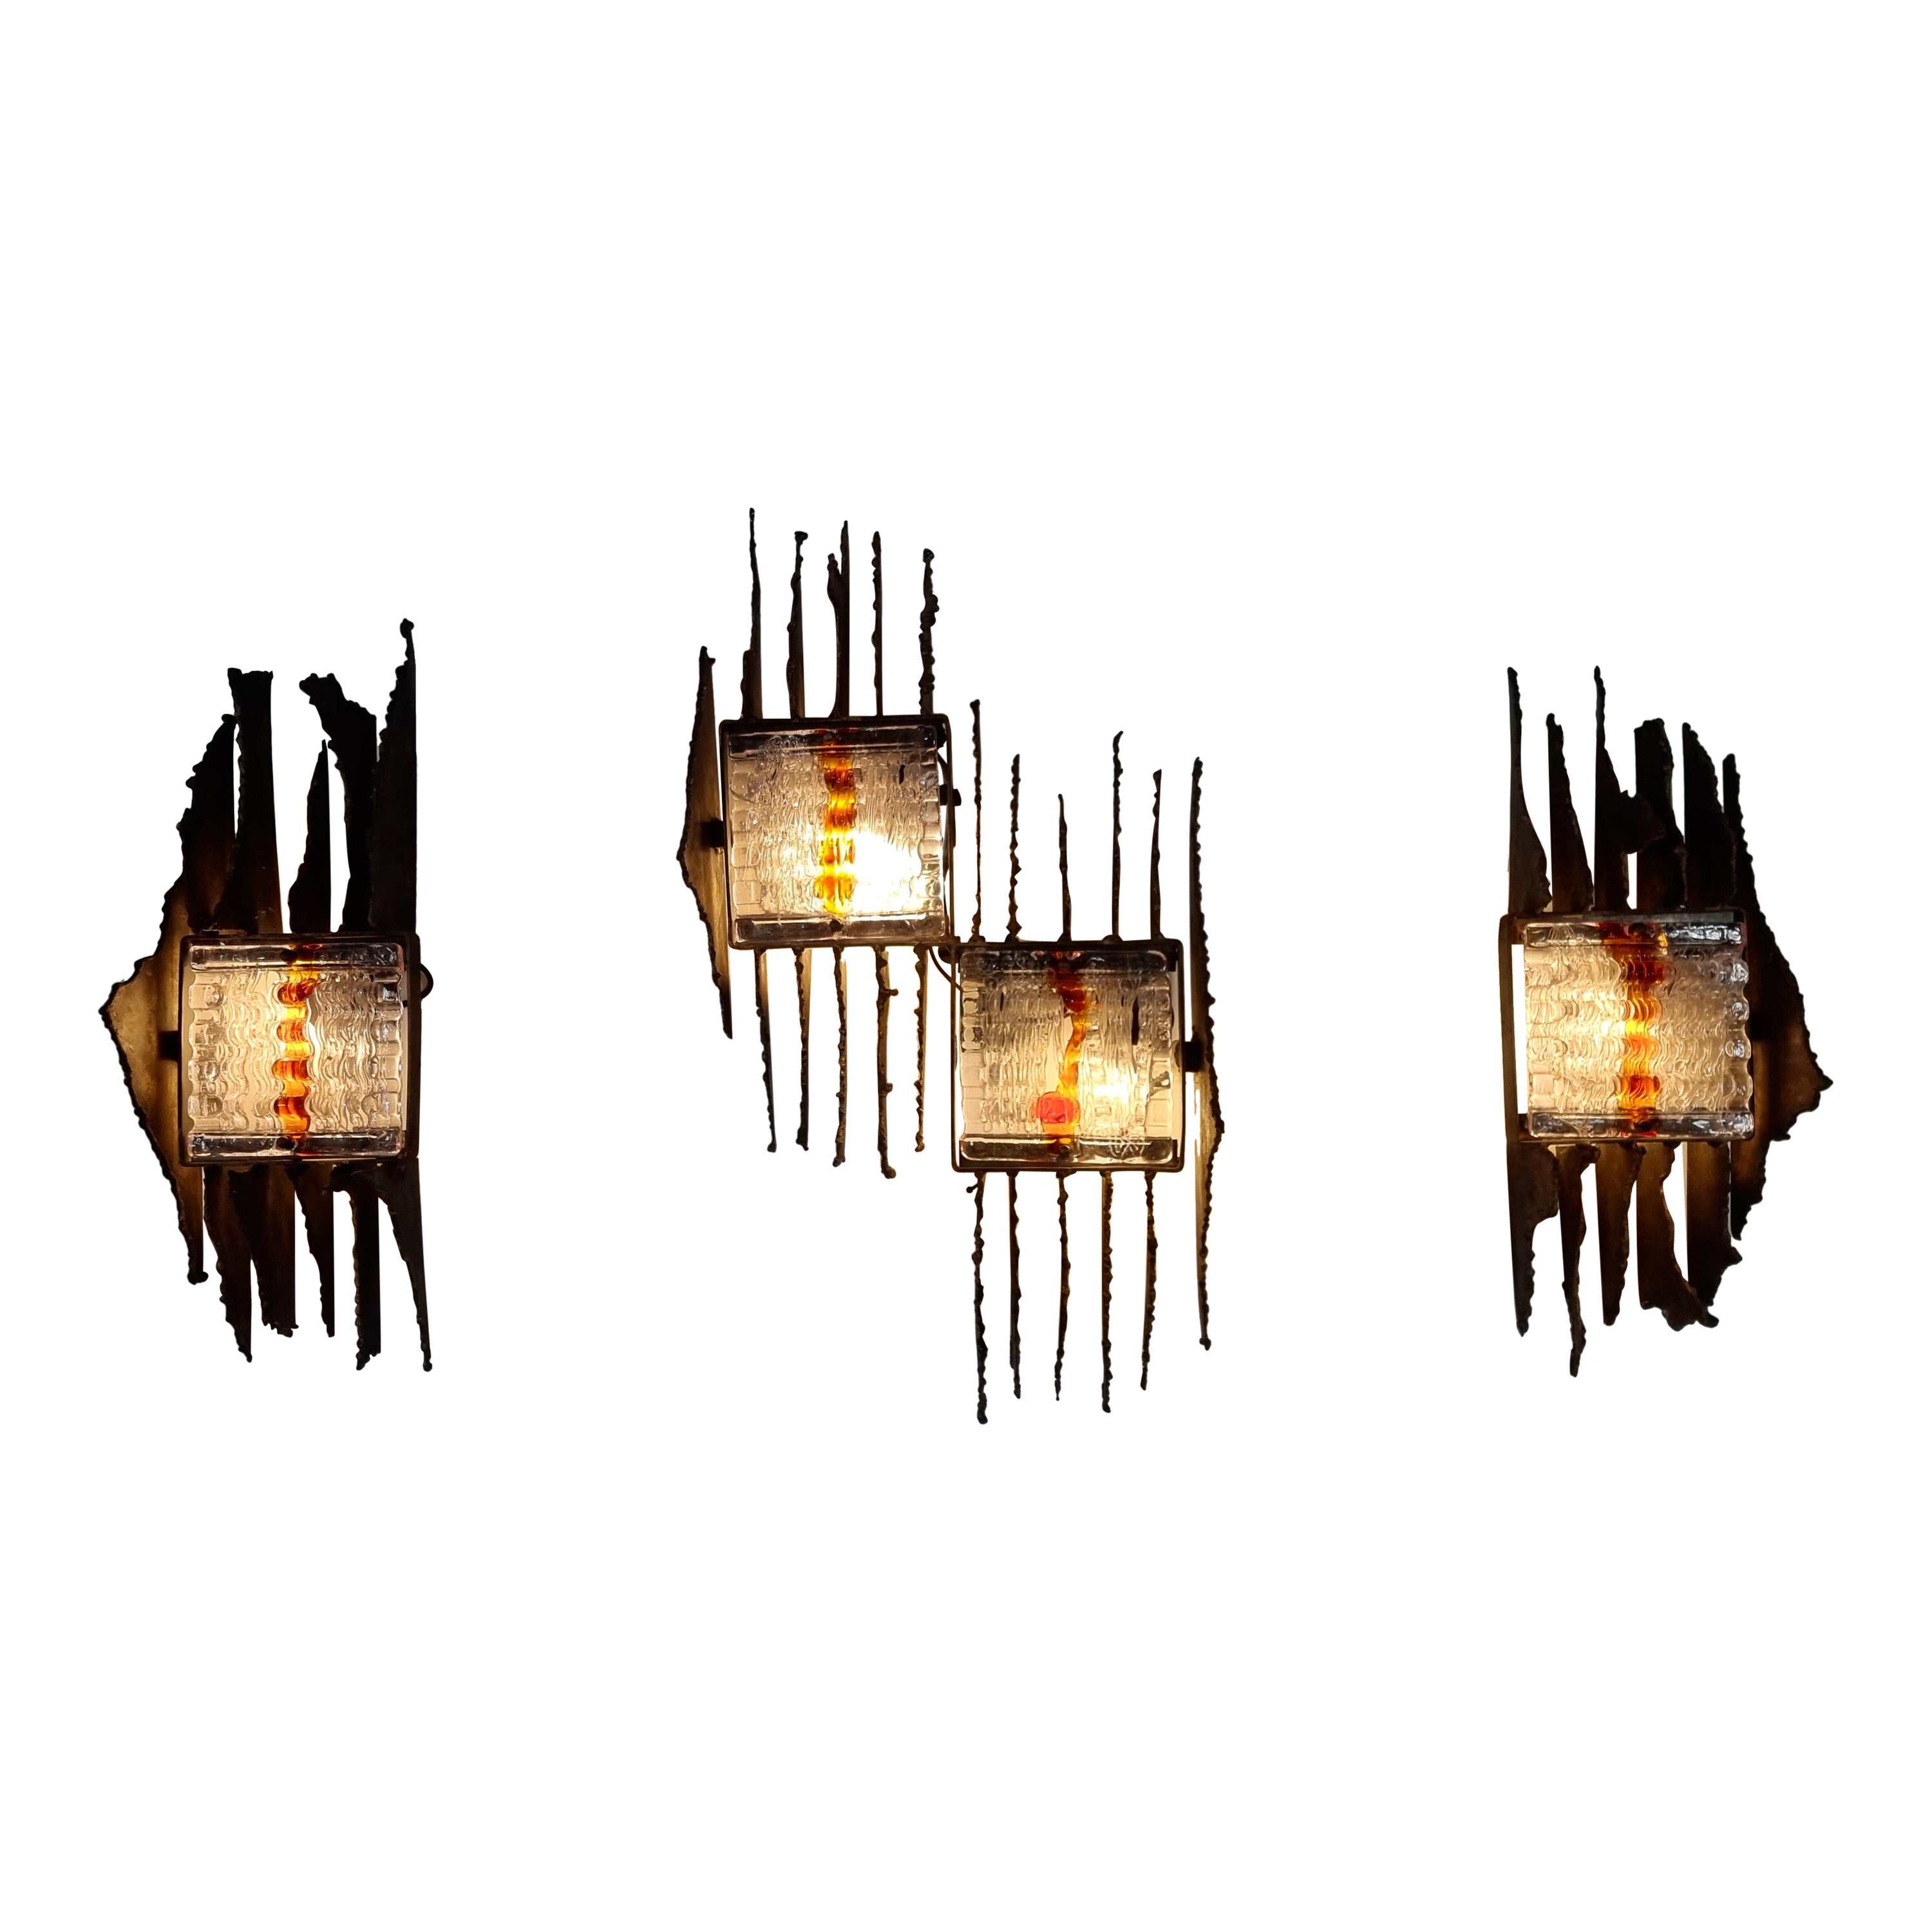 Brutalist Mid-Century Modern vintage appliques by Tom Ahlström and Hans Ehrlich manufactured by A & E Lights Sweden in the 1970s.

The lamps have a heavy dark iron structure and a two-tone (transparent and amber) texture in their unique